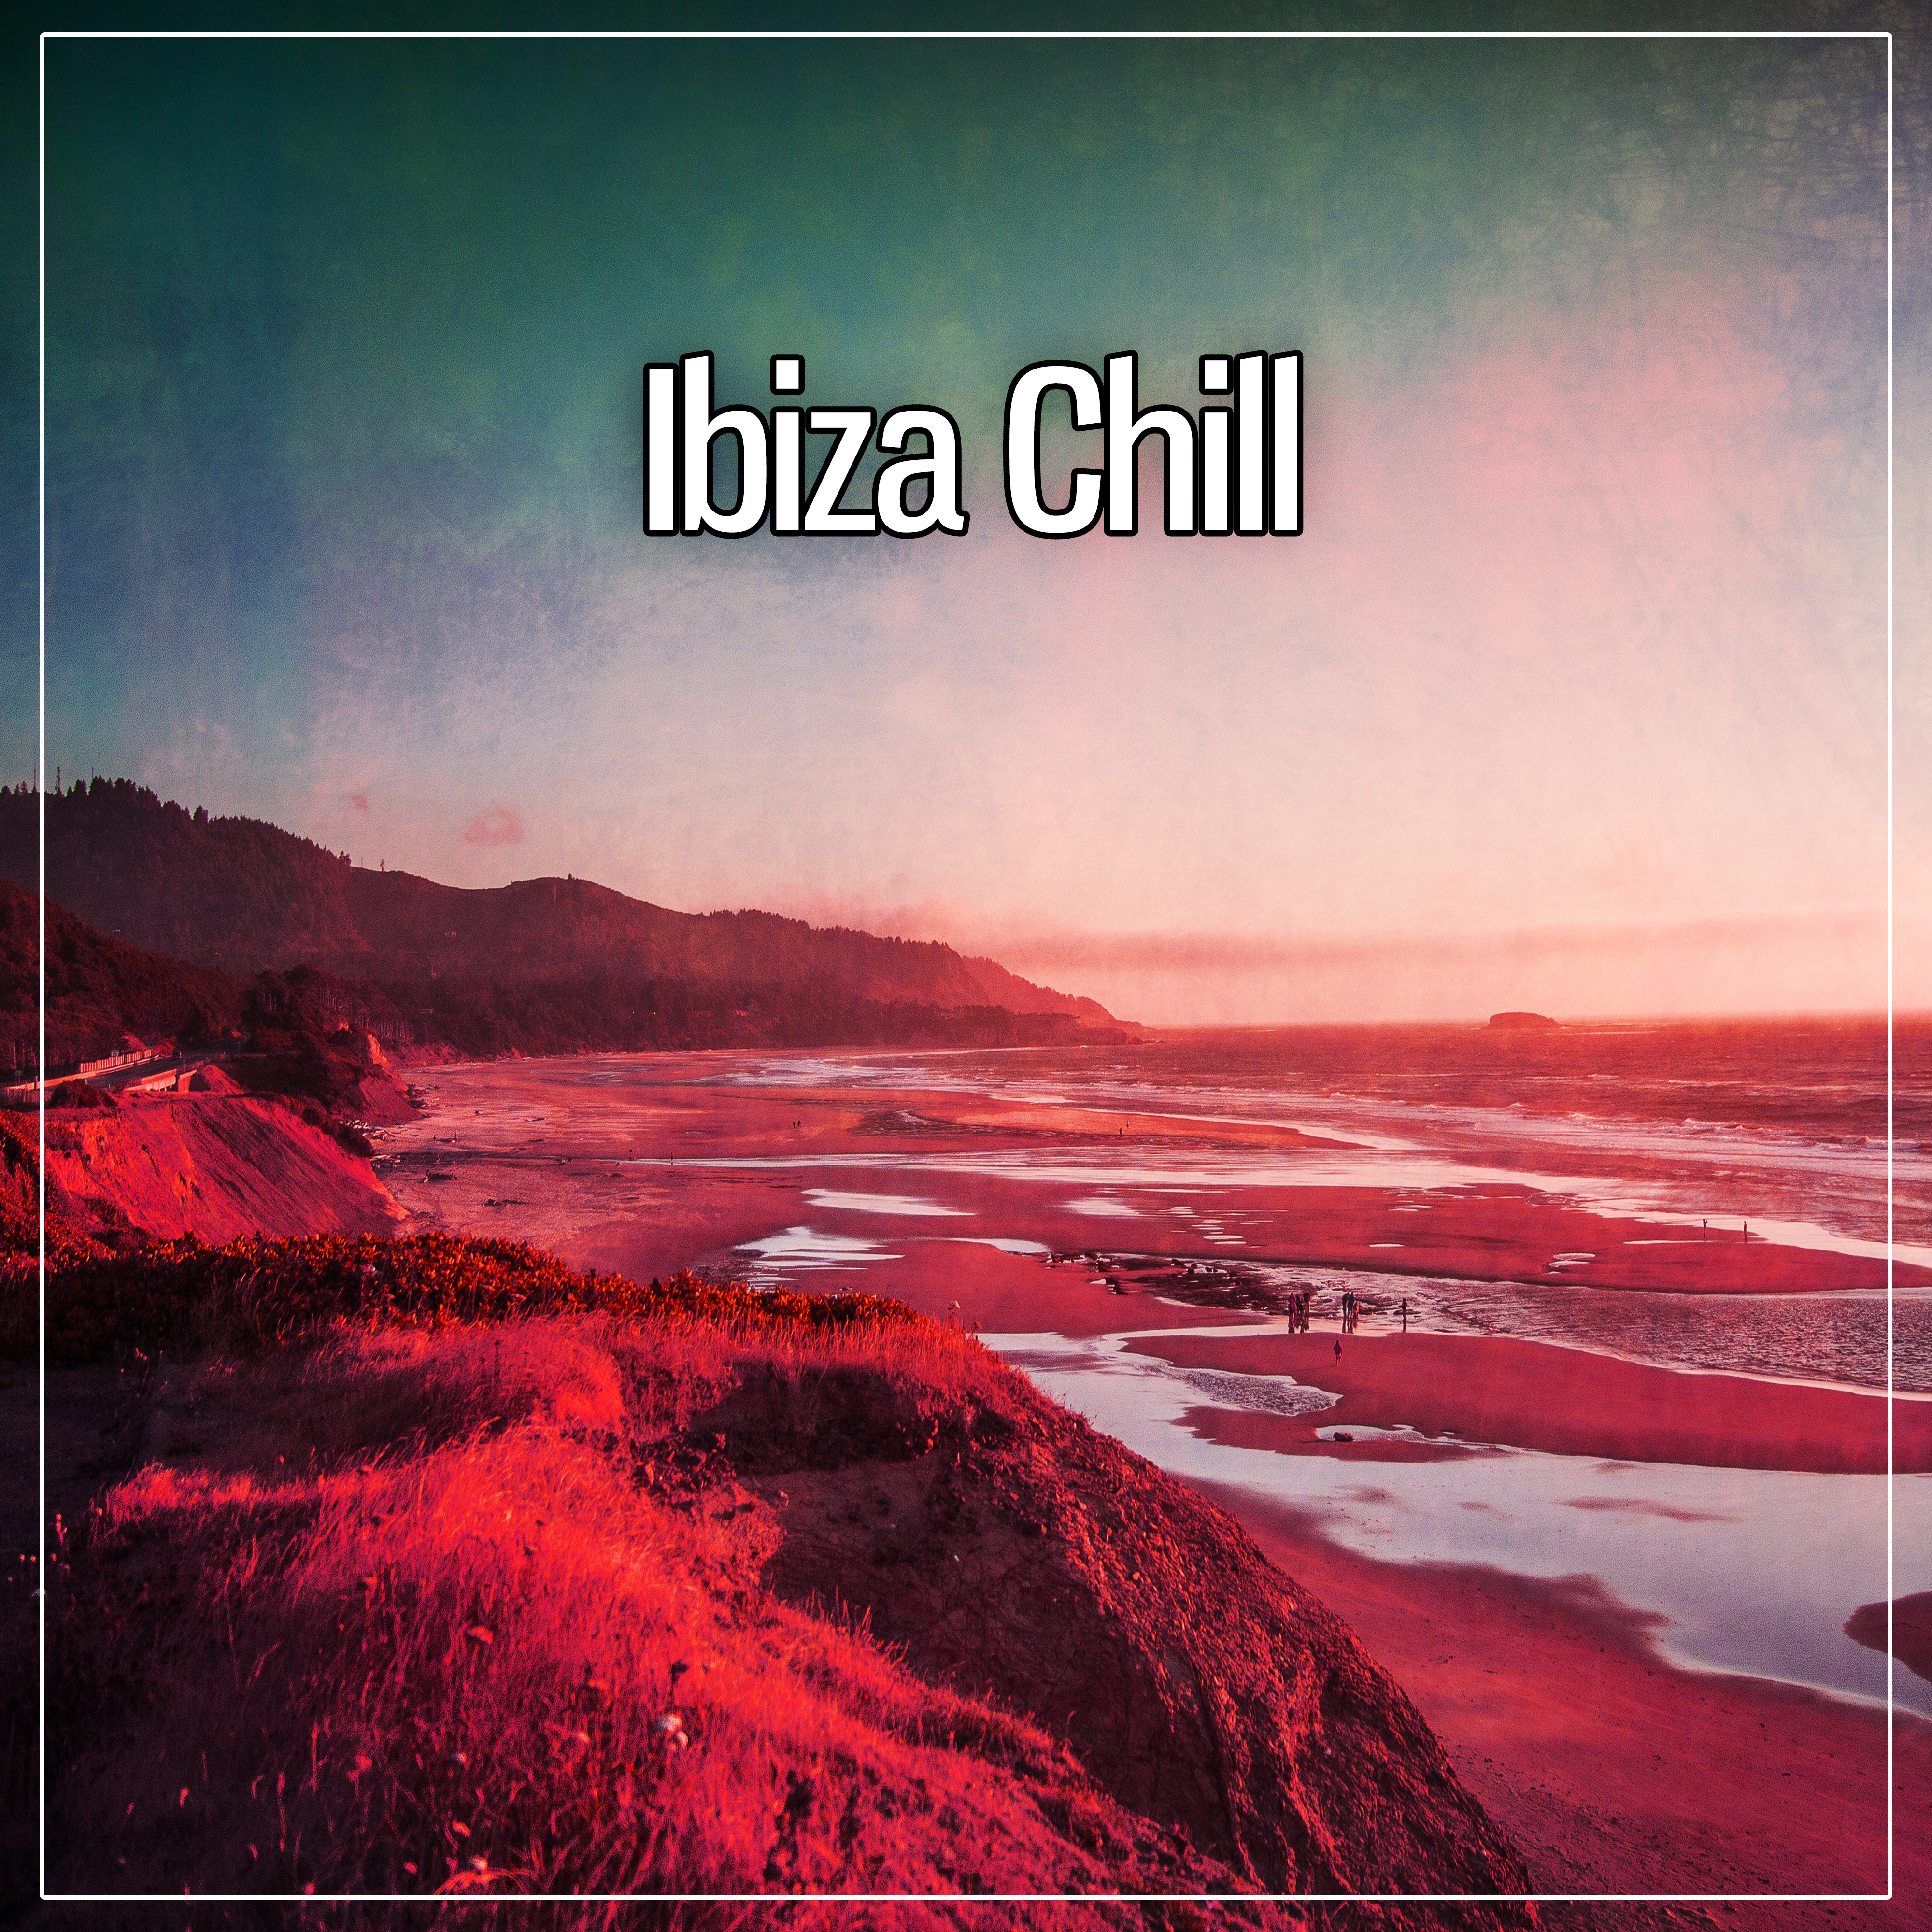 Ibiza Chill – Best Chillout Music, Party Time, Electronic Music, Beach Lounge, **** Dance